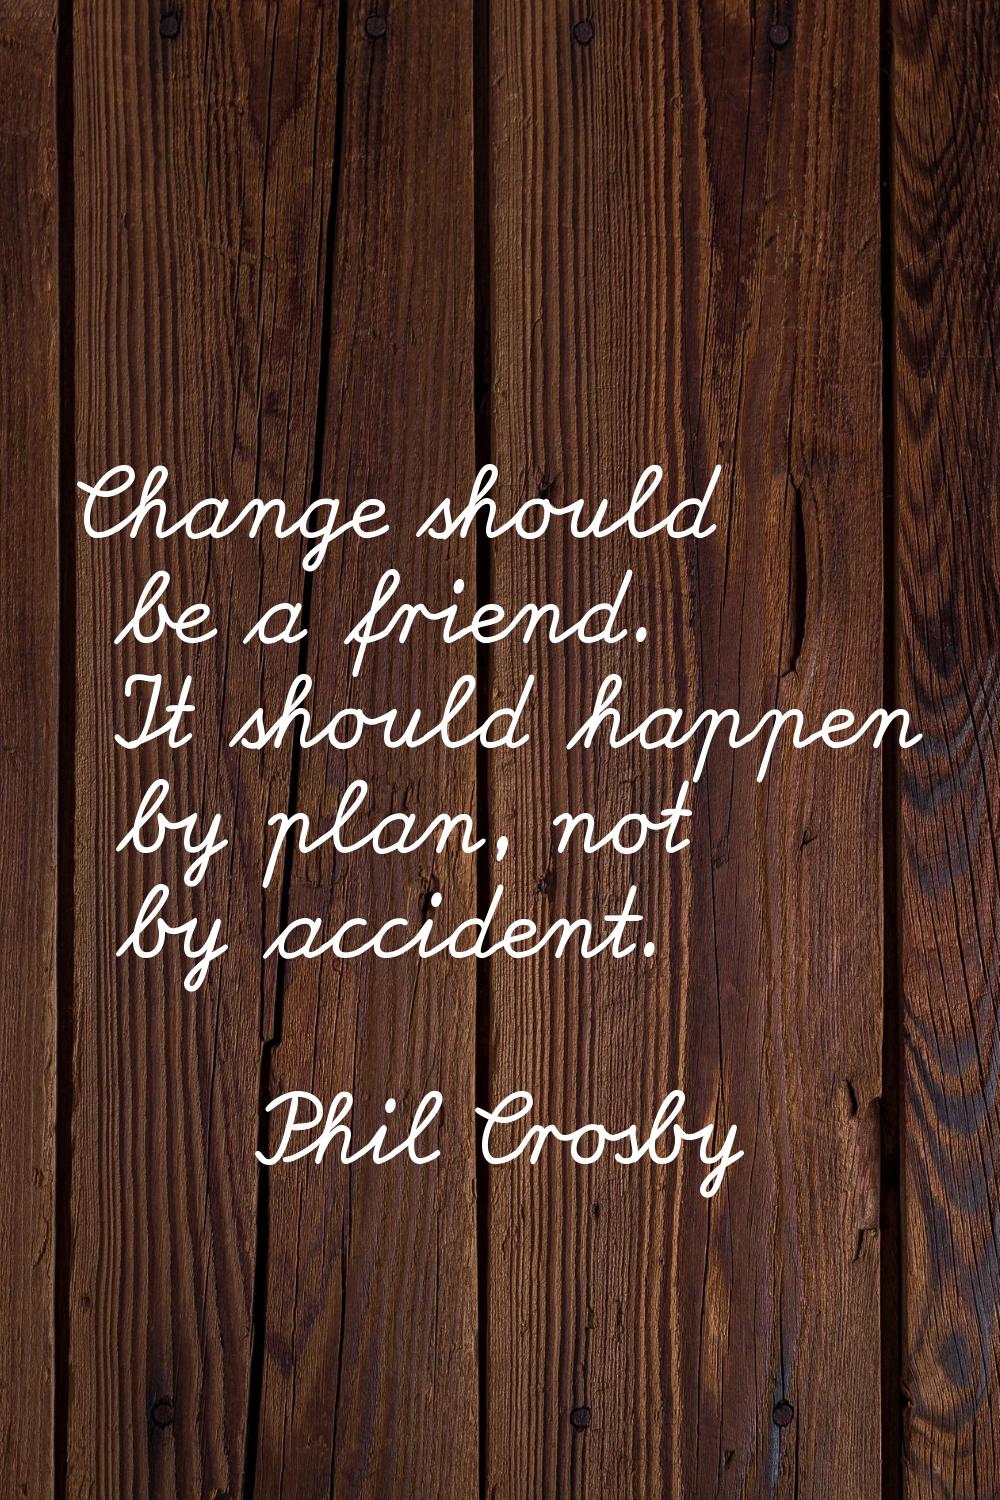 Change should be a friend. It should happen by plan, not by accident.